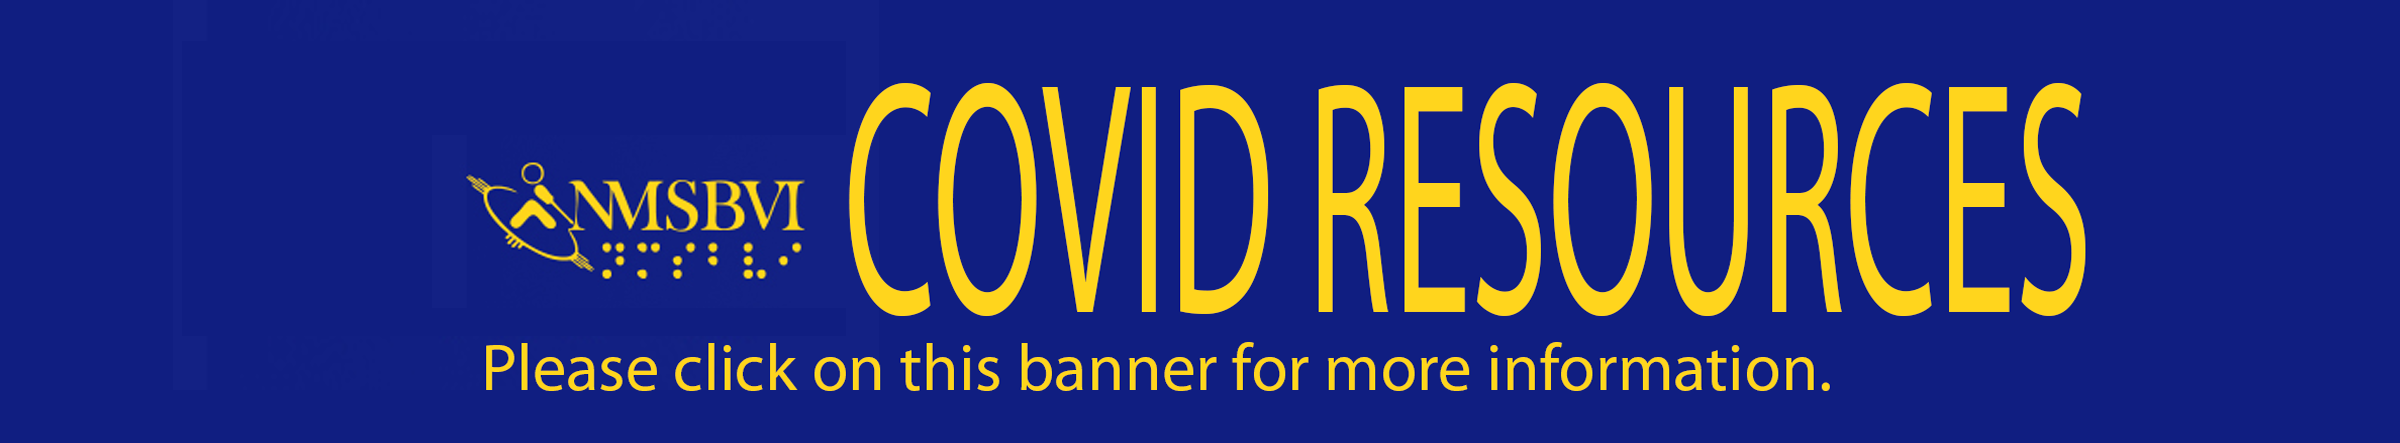 NMSBVI Covid resources Banner